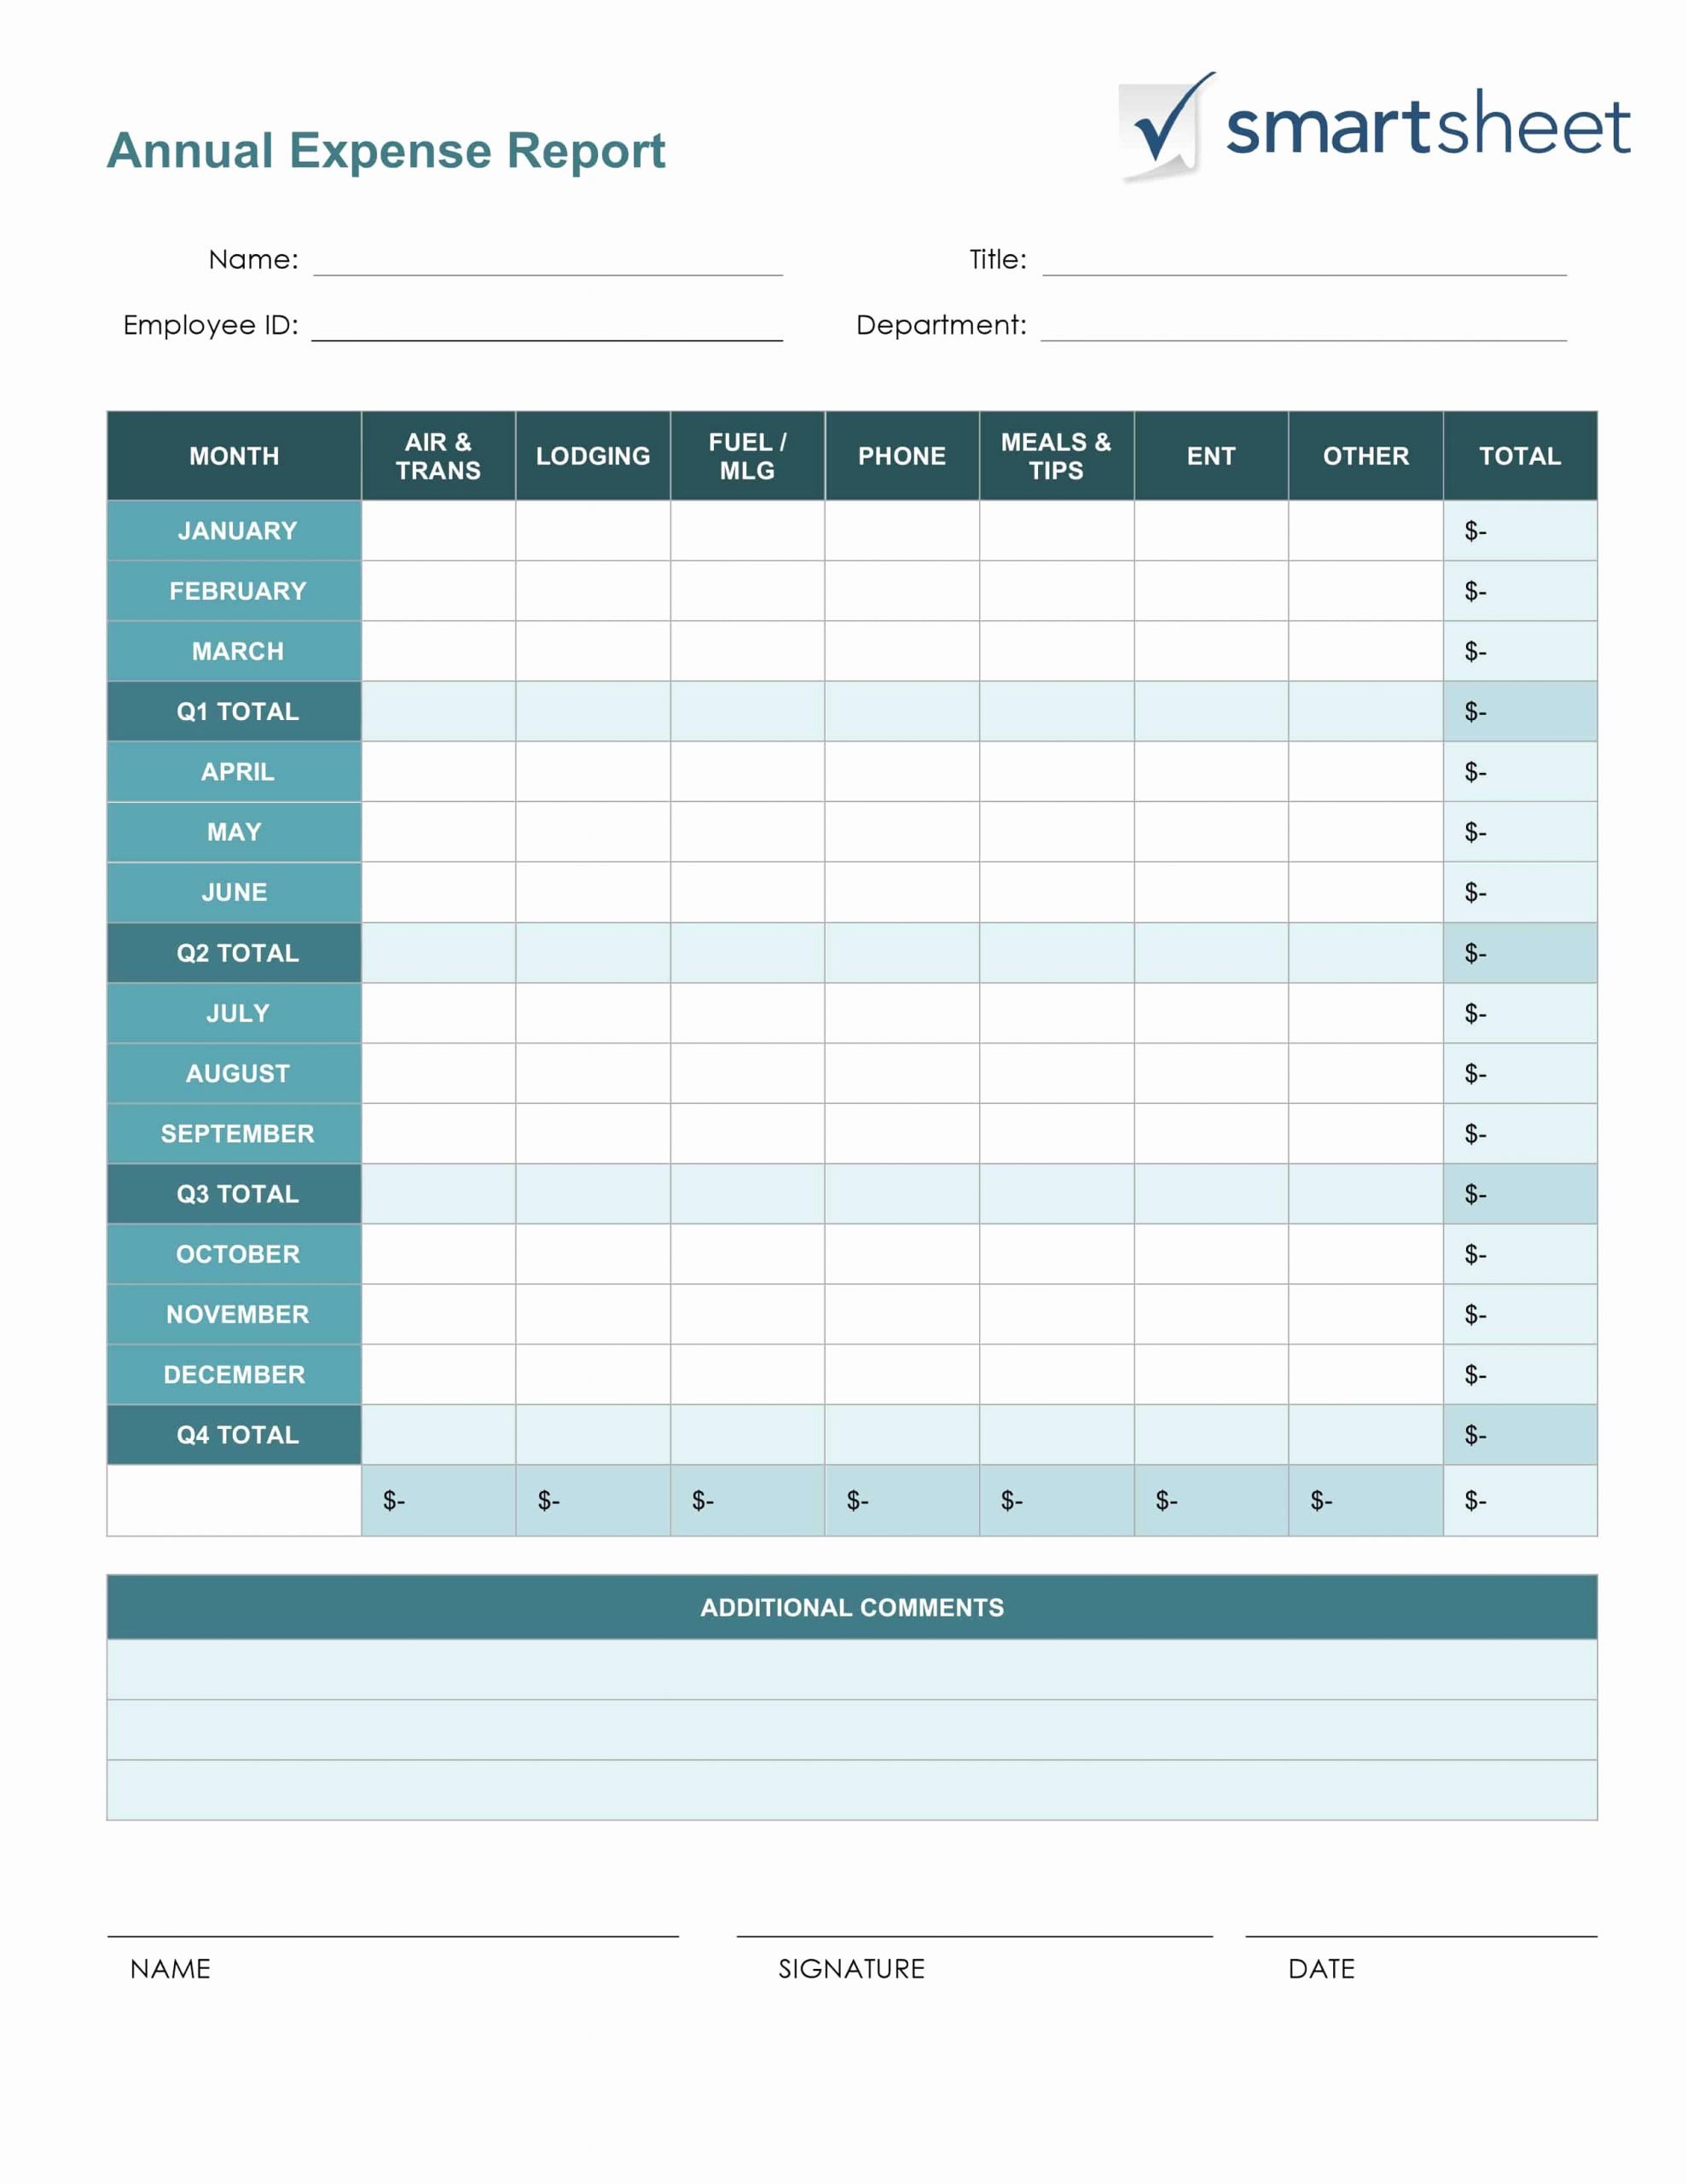 Expenses form Template Free Luxury Free Expense Report Templates Smartsheet